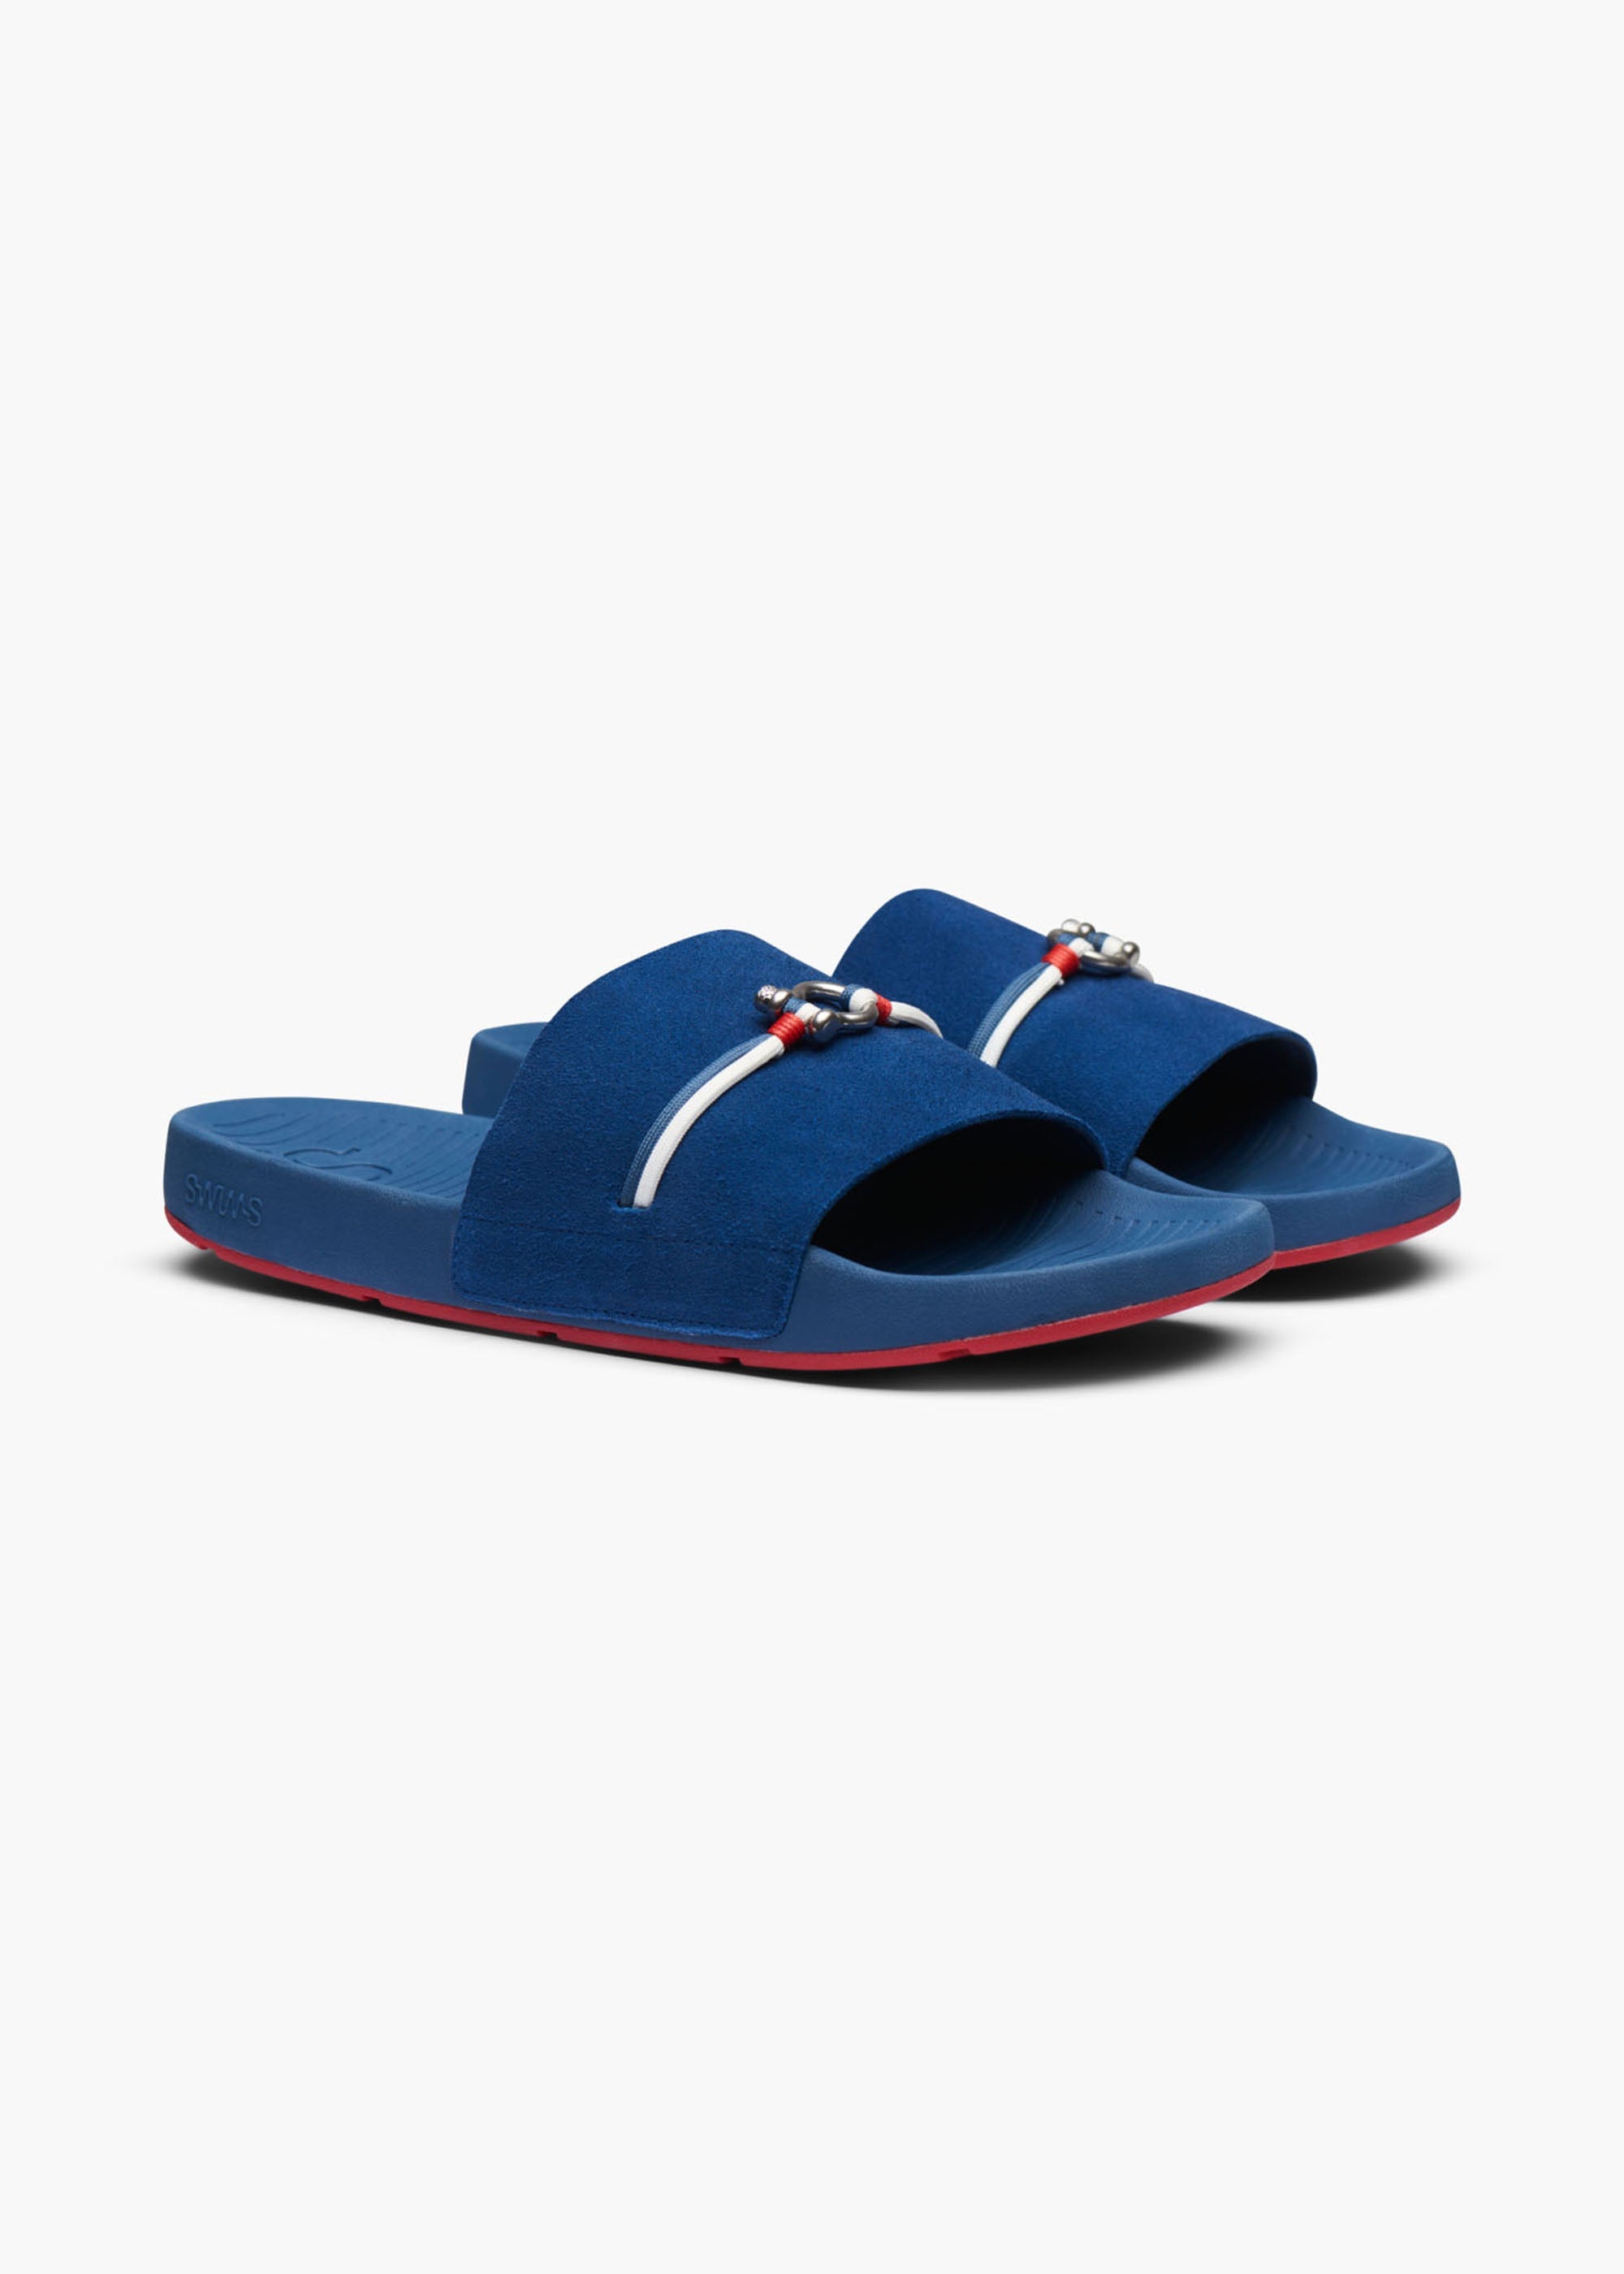 Women's Riva Loafer in Navy for Womens, SWIMS